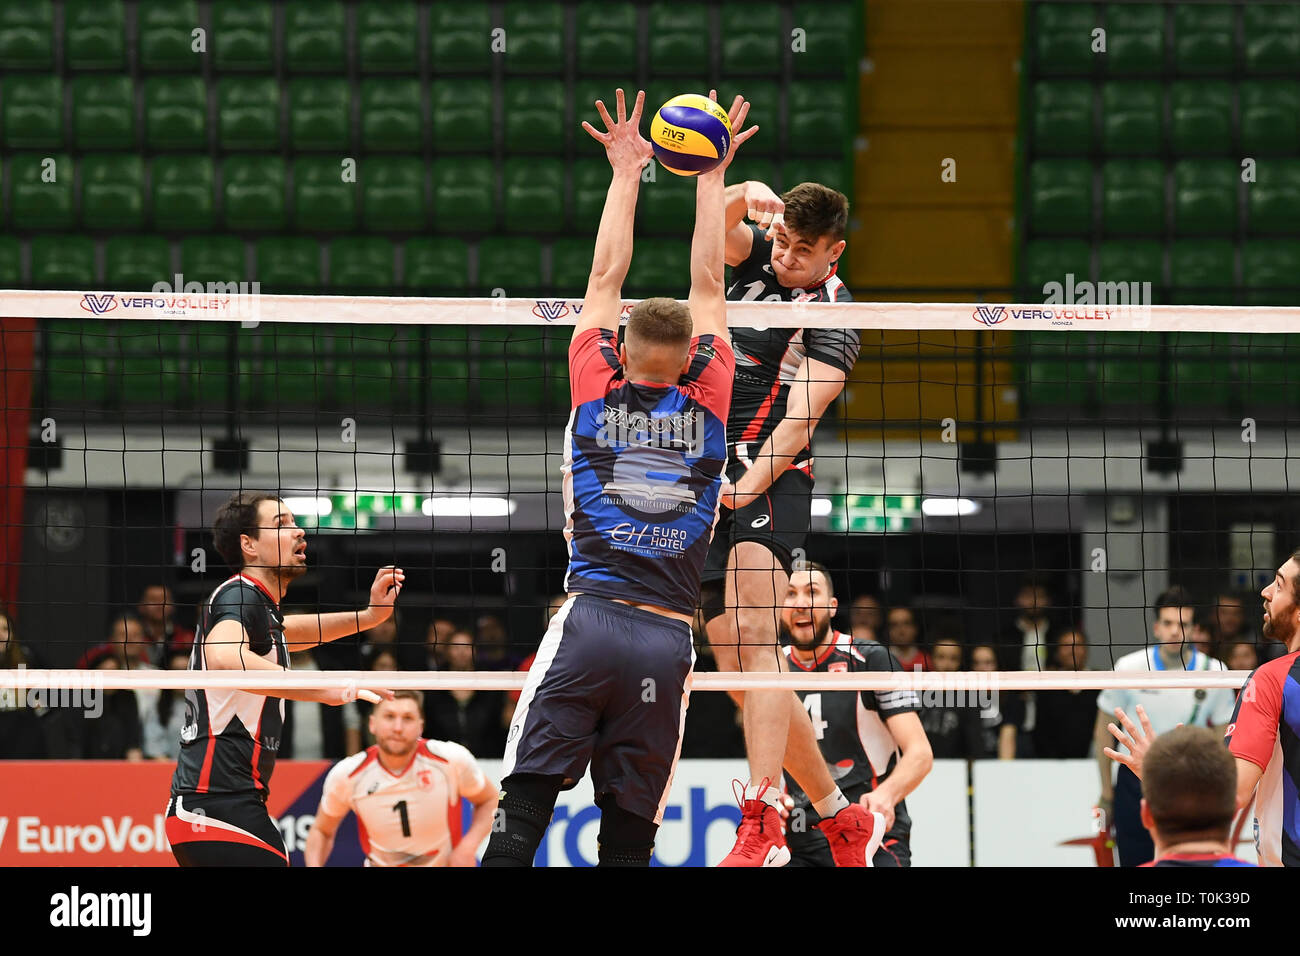 Candy Arena, Monza, Italy. 20th March, 2019. CEV Volleyball Challenge Cup men, Final, 1st leg. Alexander Gutsalyuk of Belogorie Belgorod during the match between Vero Volley Monza and Belogorie Belgorod at the Candy Arena Italy.  Credit: Claudio Grassi/Alamy Live News Stock Photo